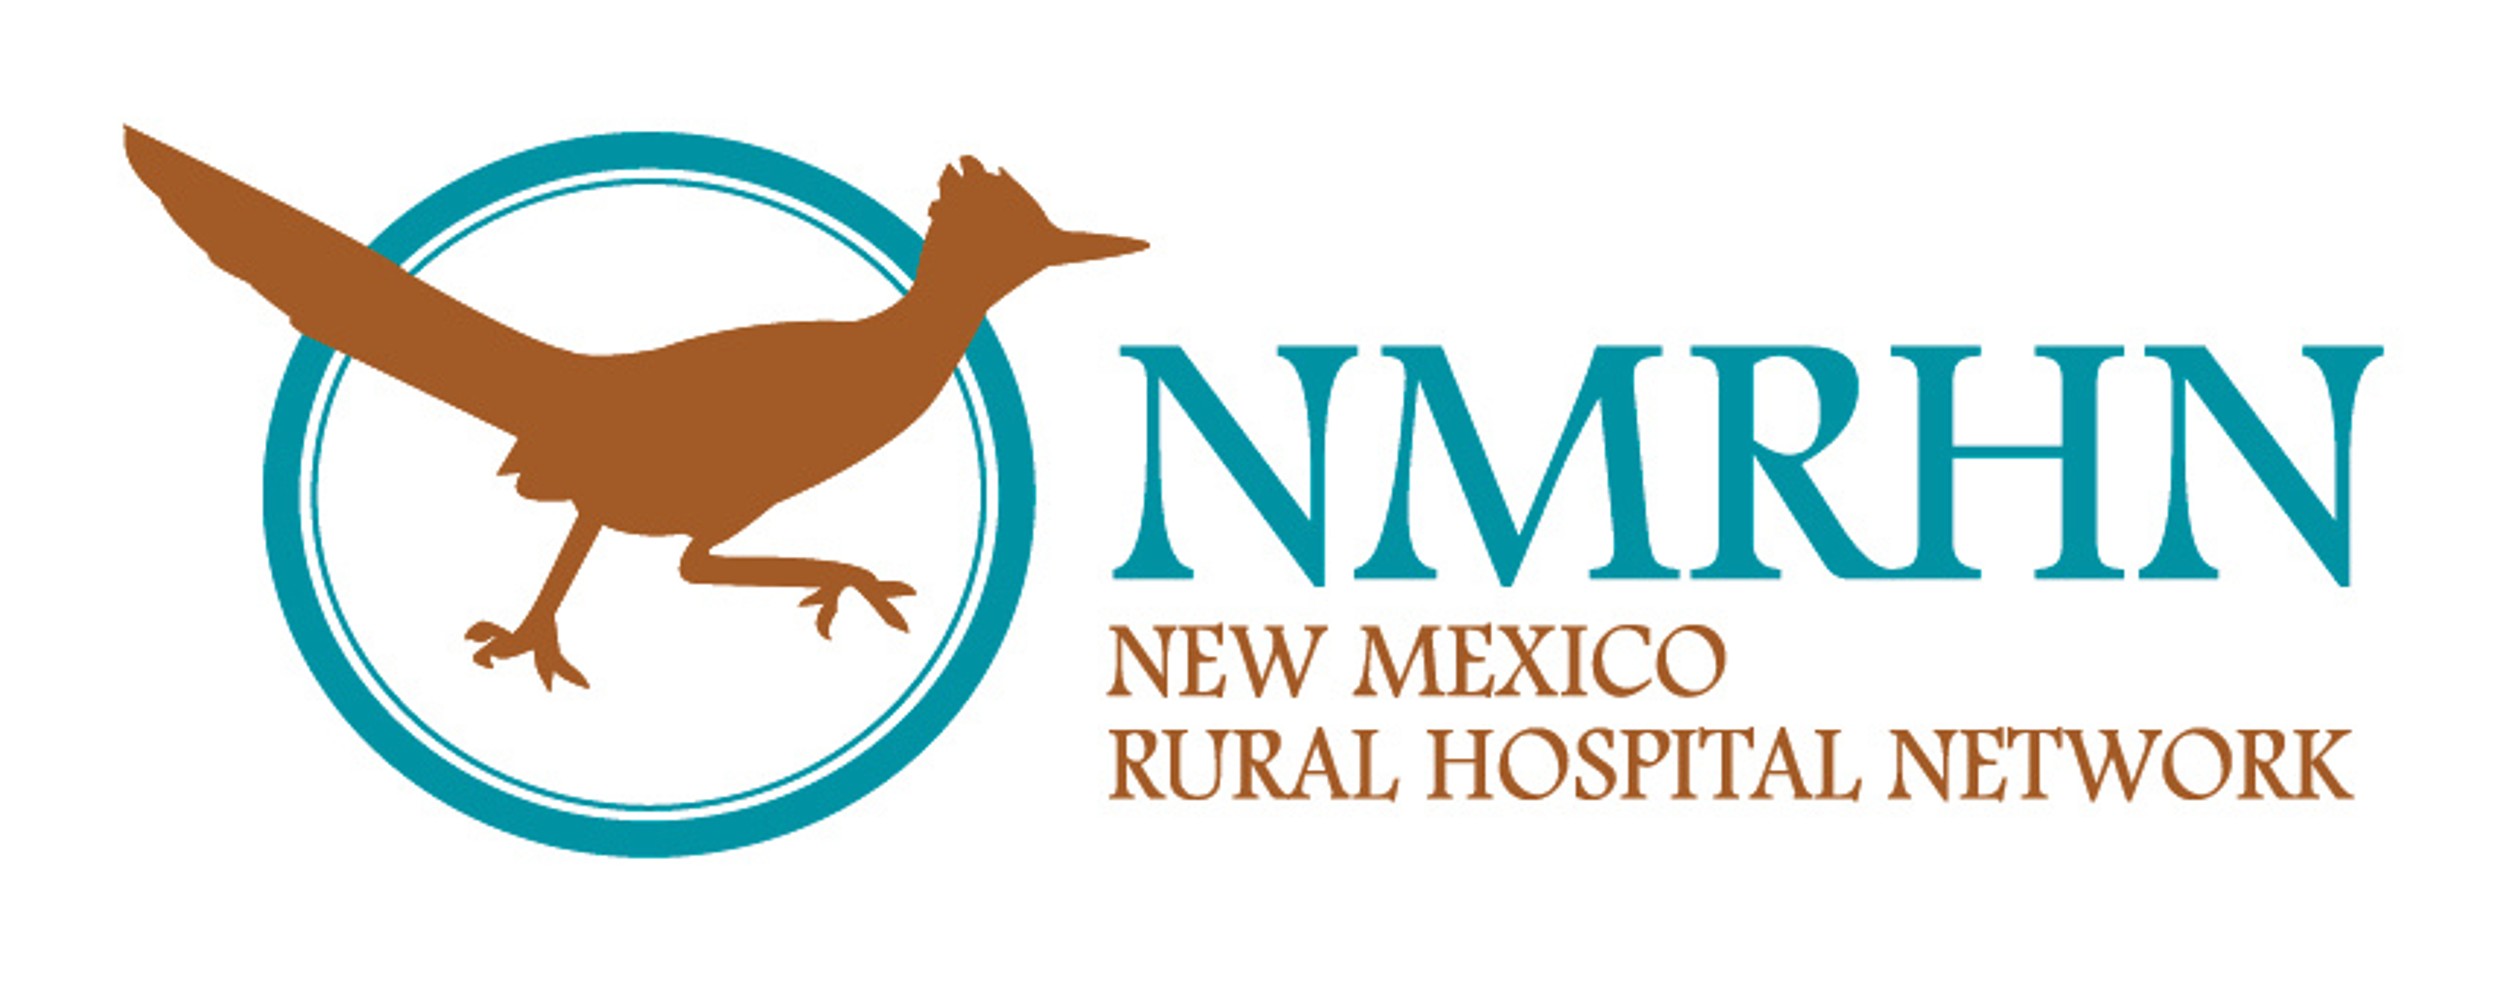 New Mexico Rural Hospital Network